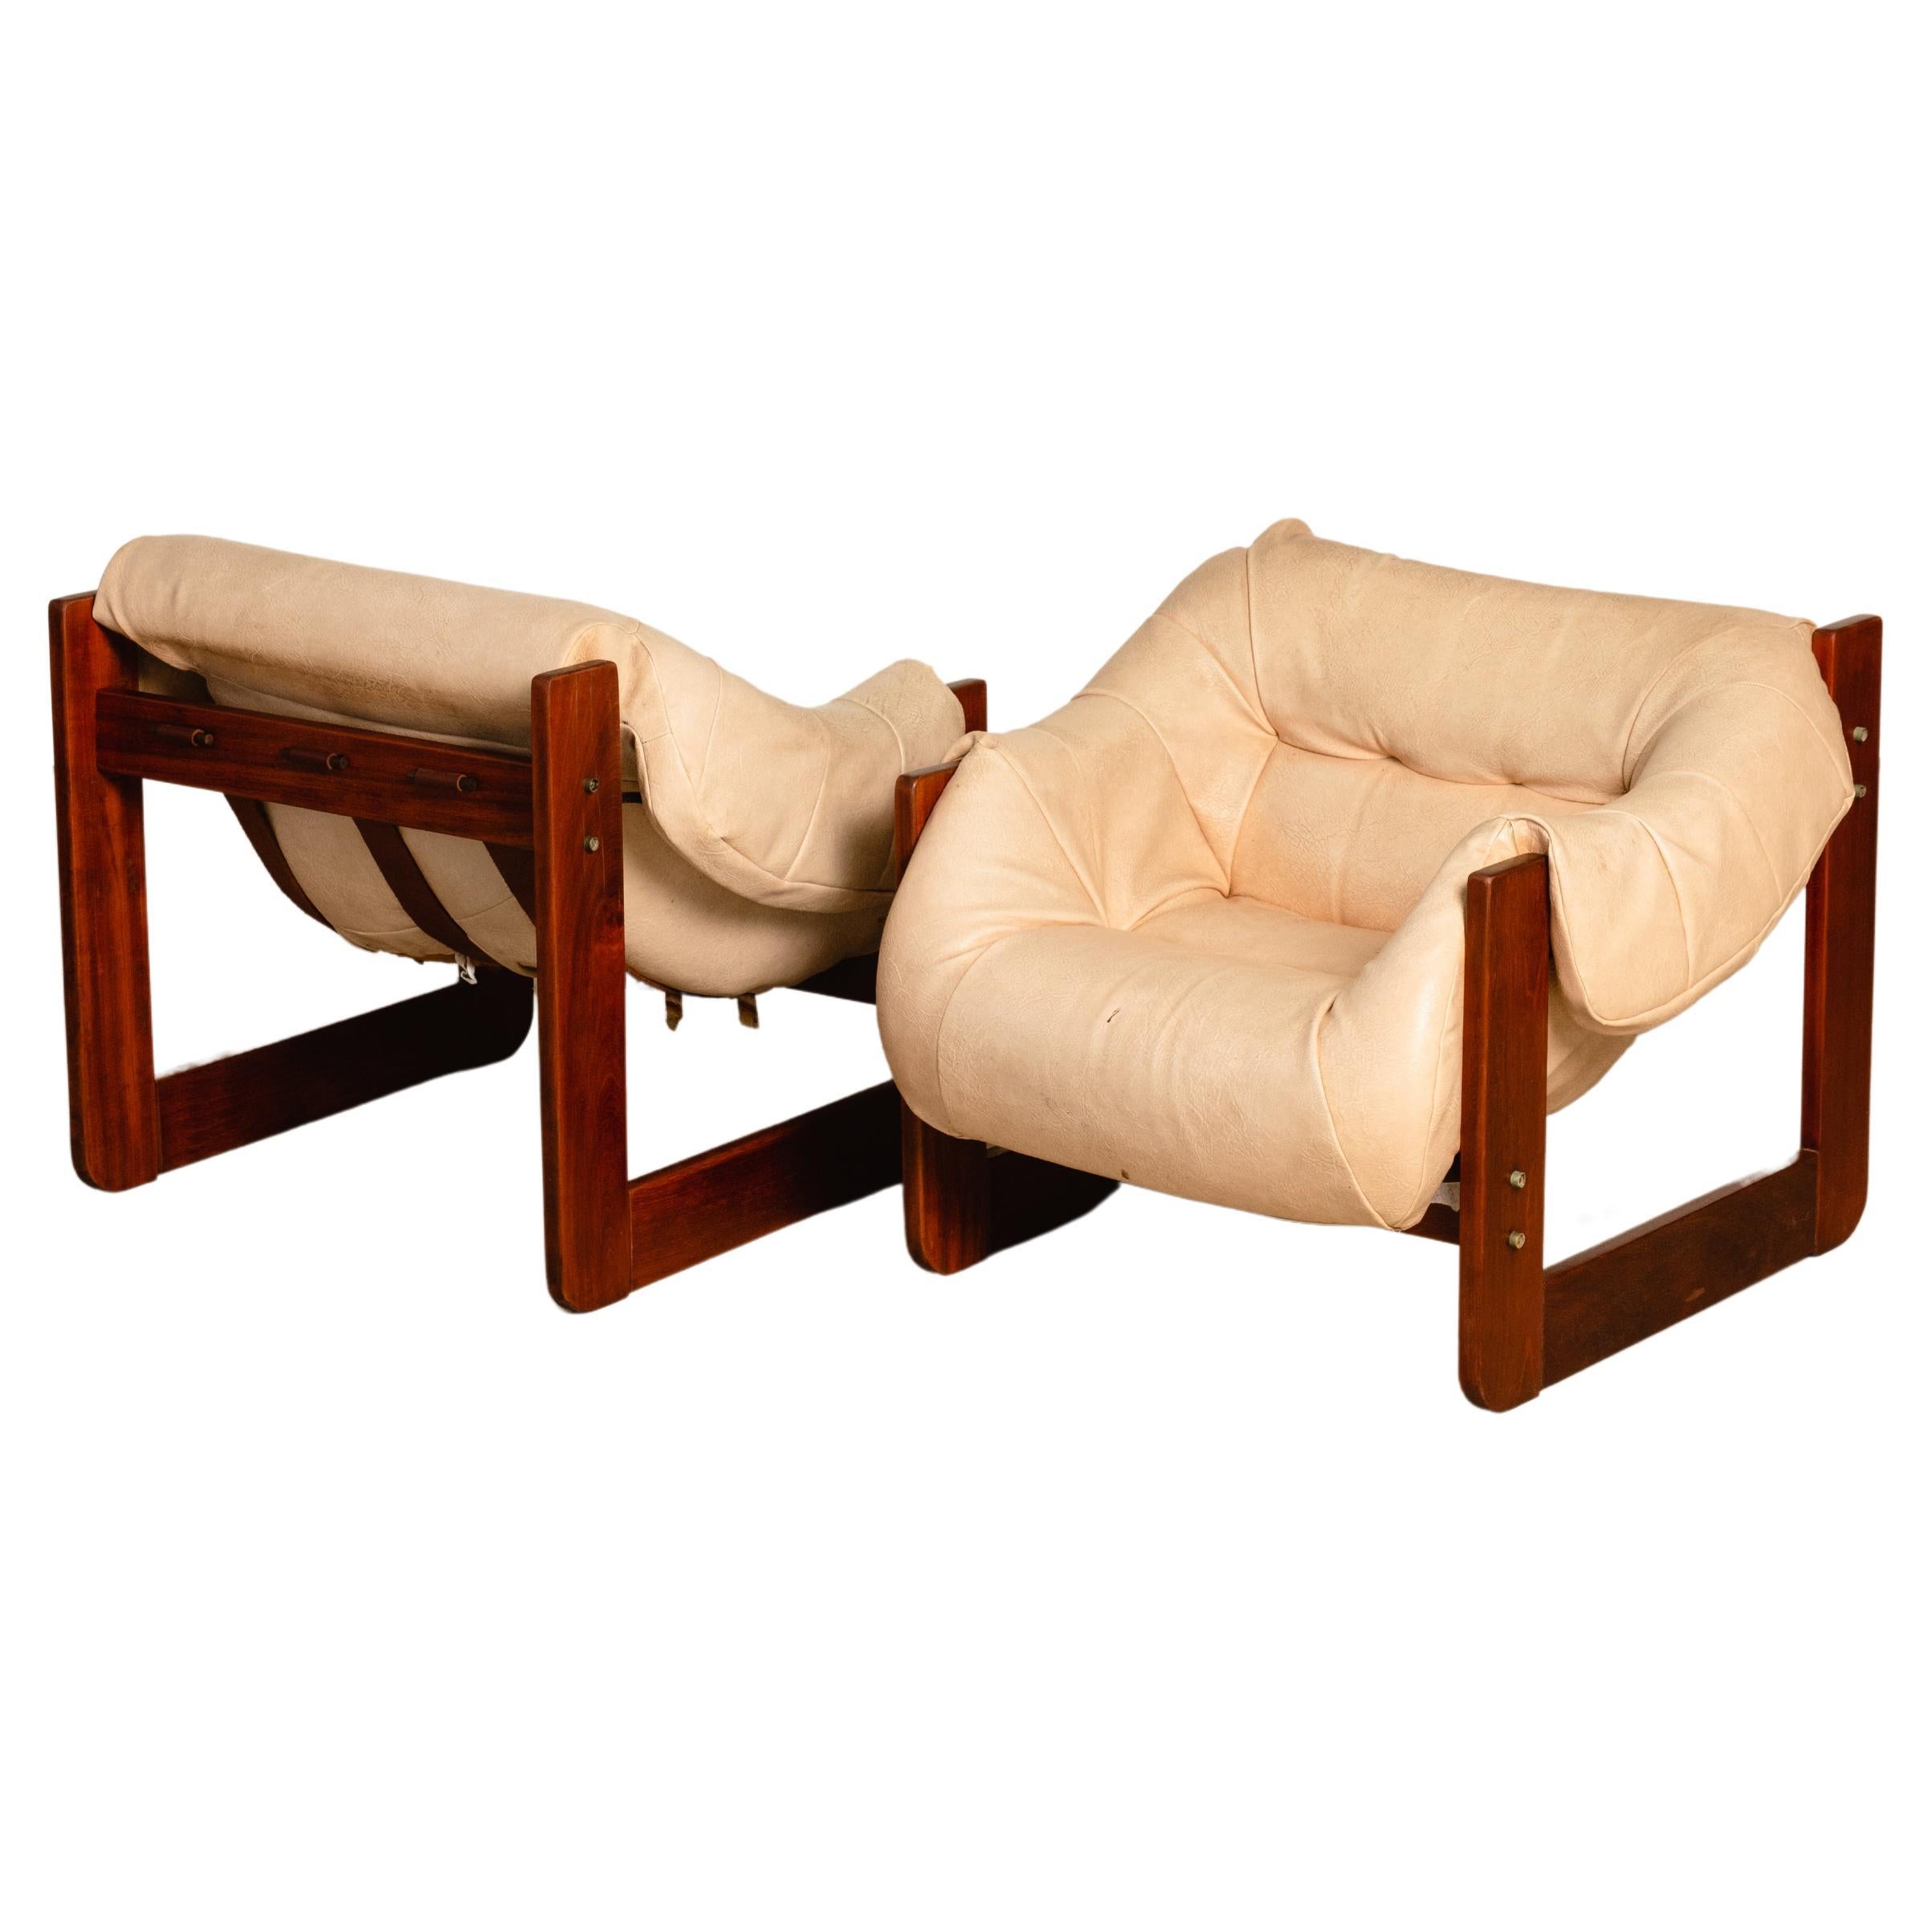 Pair of Brazilian Midcentury Lounge Chairs MP-97 by Percival Lafer, 1970s